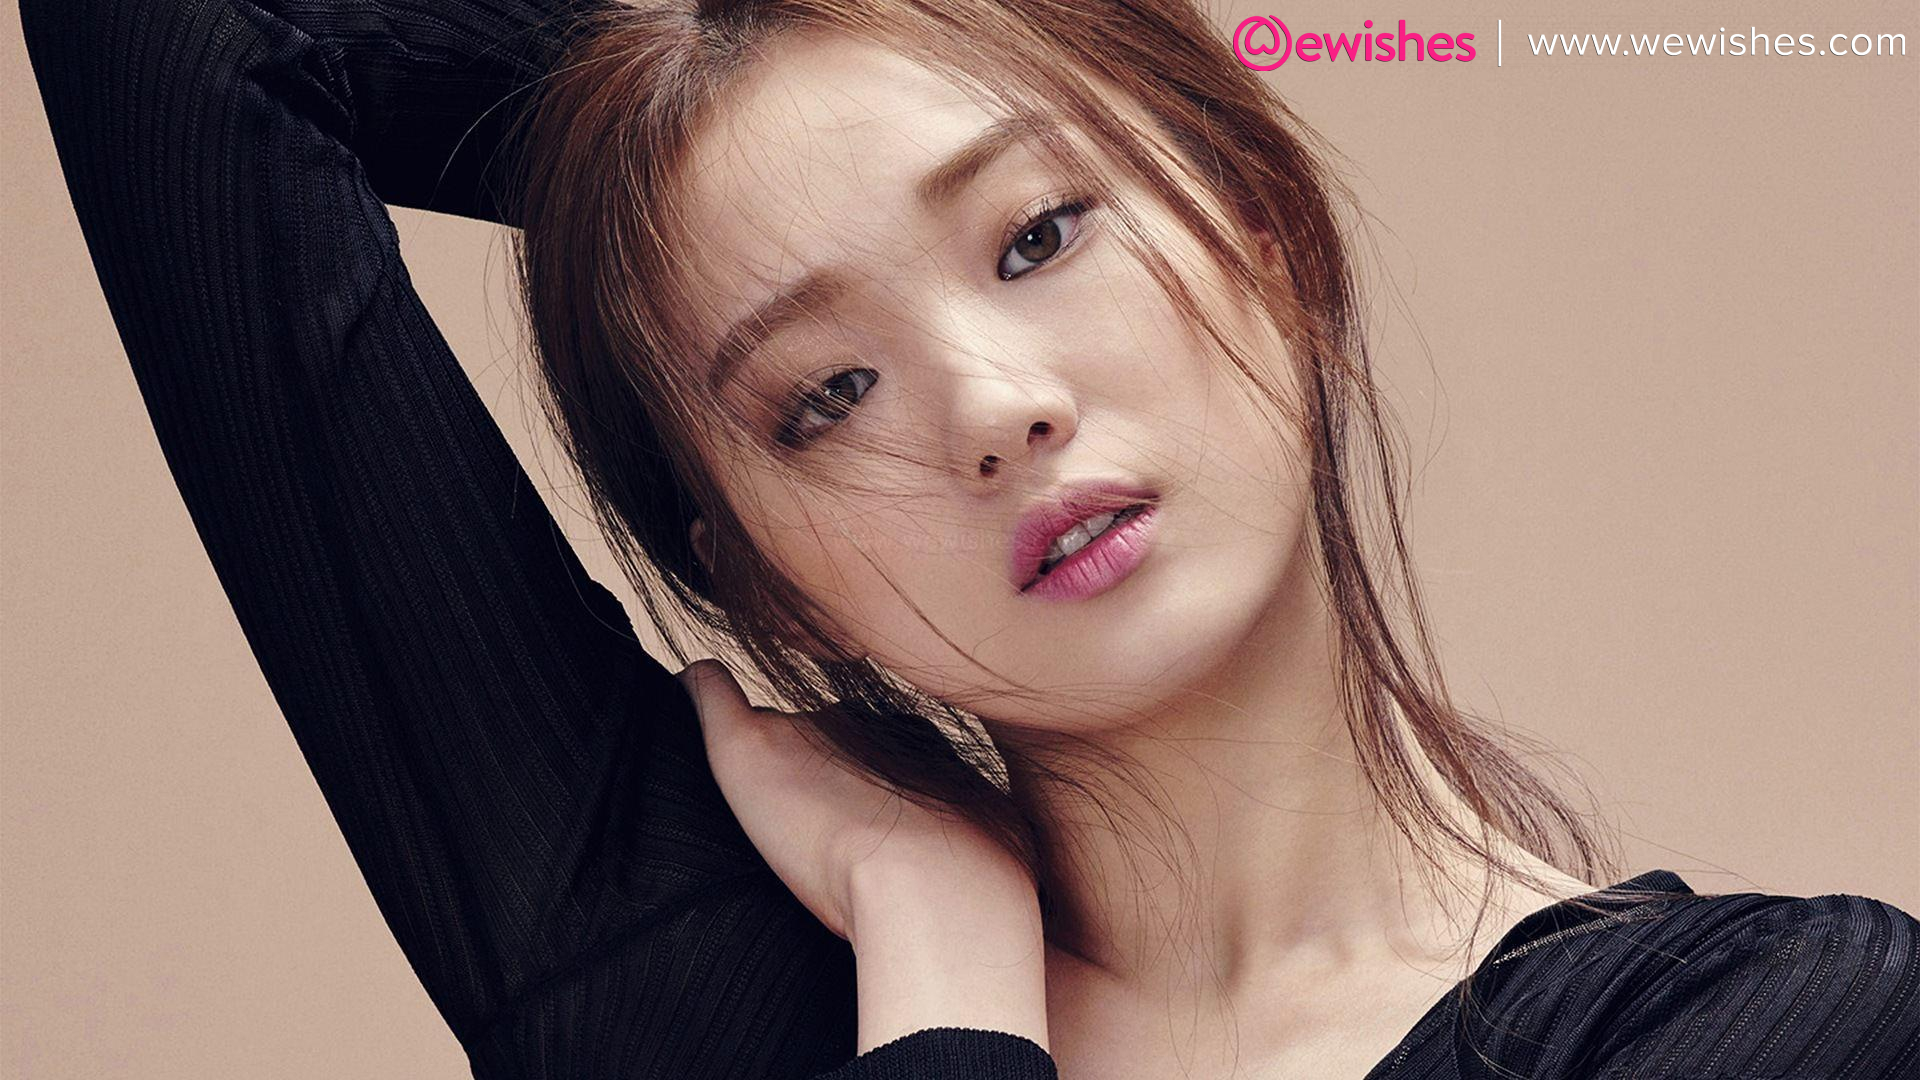 Lee Sung Kyung 1